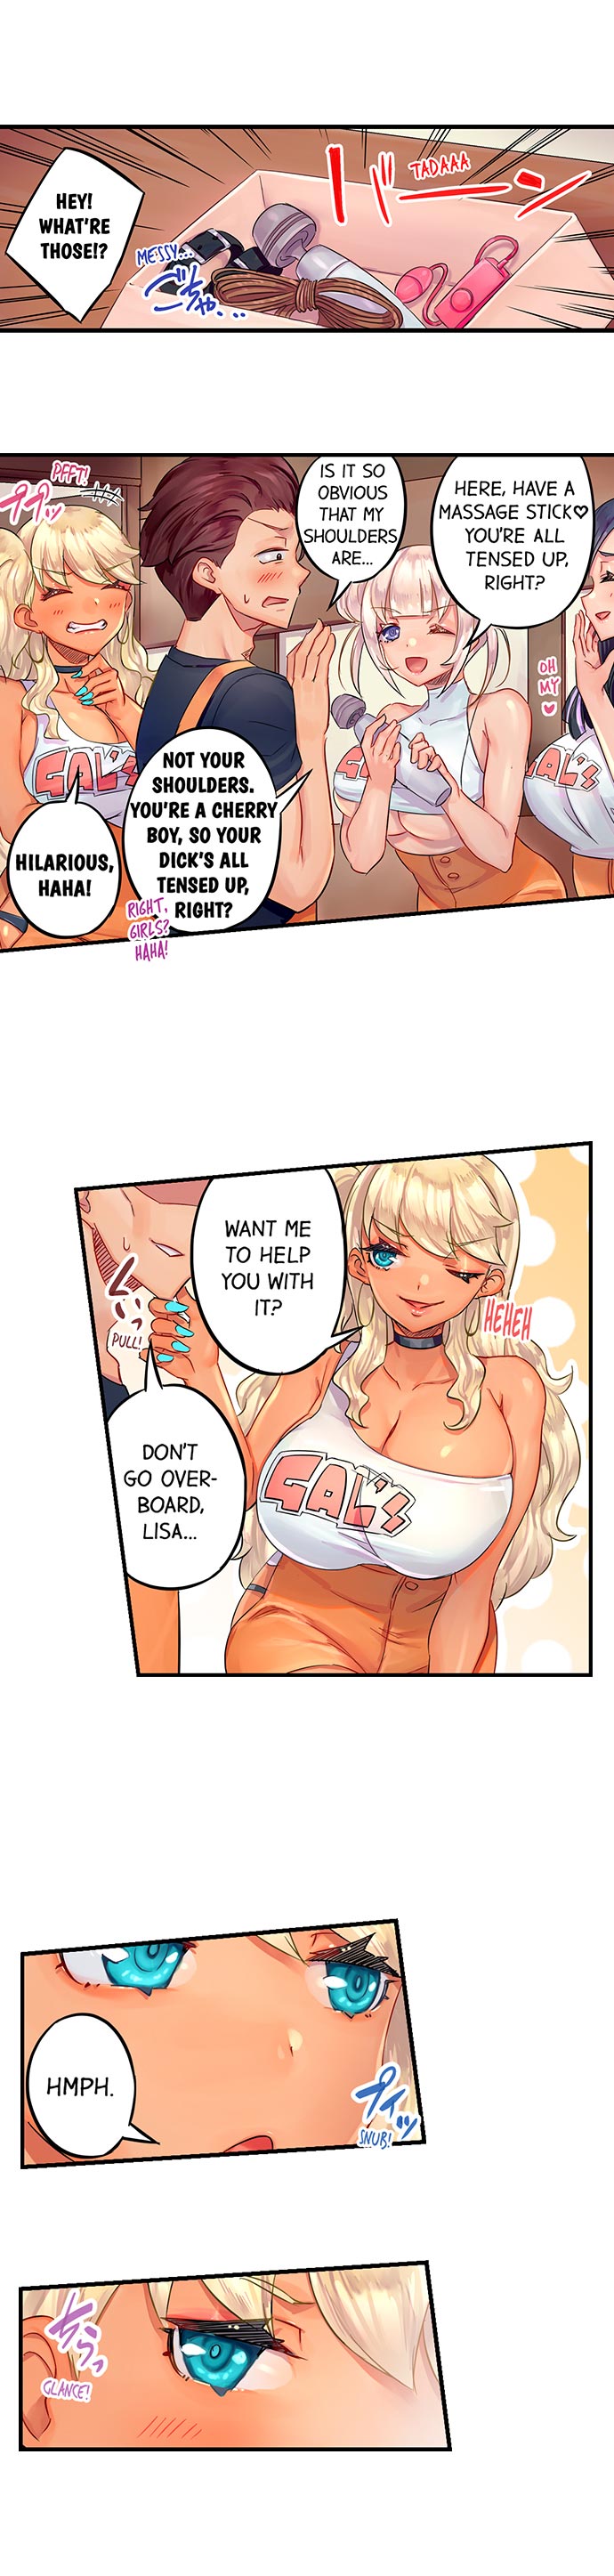 Orgasm Management for This Tanned Girl - Chapter 1 Page 4